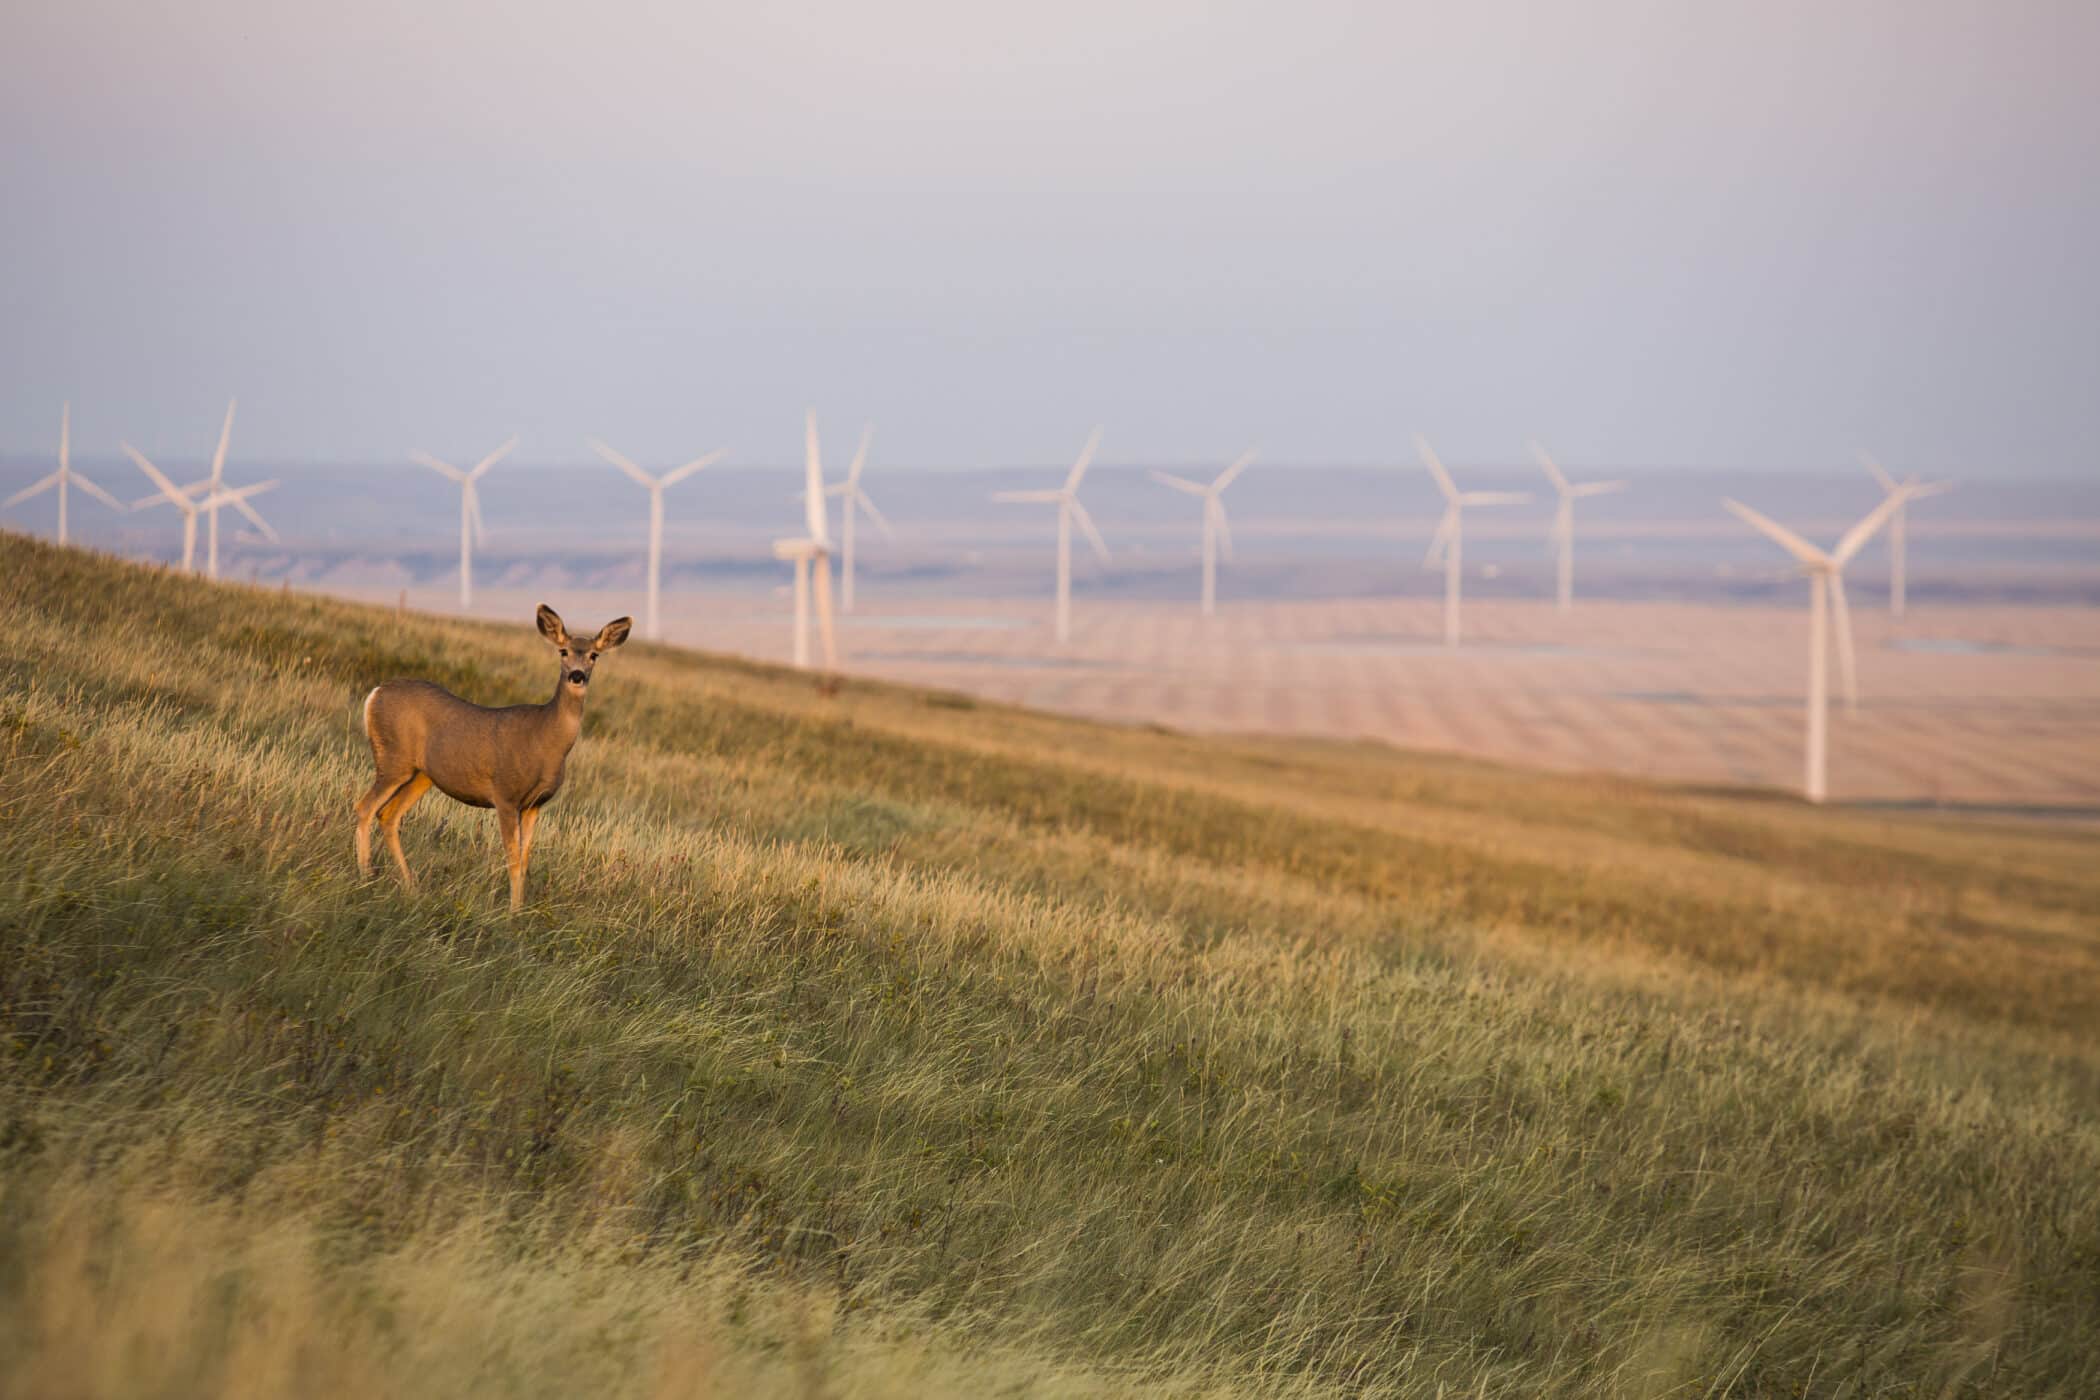 image of a deer standing in a grassy meadow with wind turbines in the background - sustainability Mainstream Renewable Power